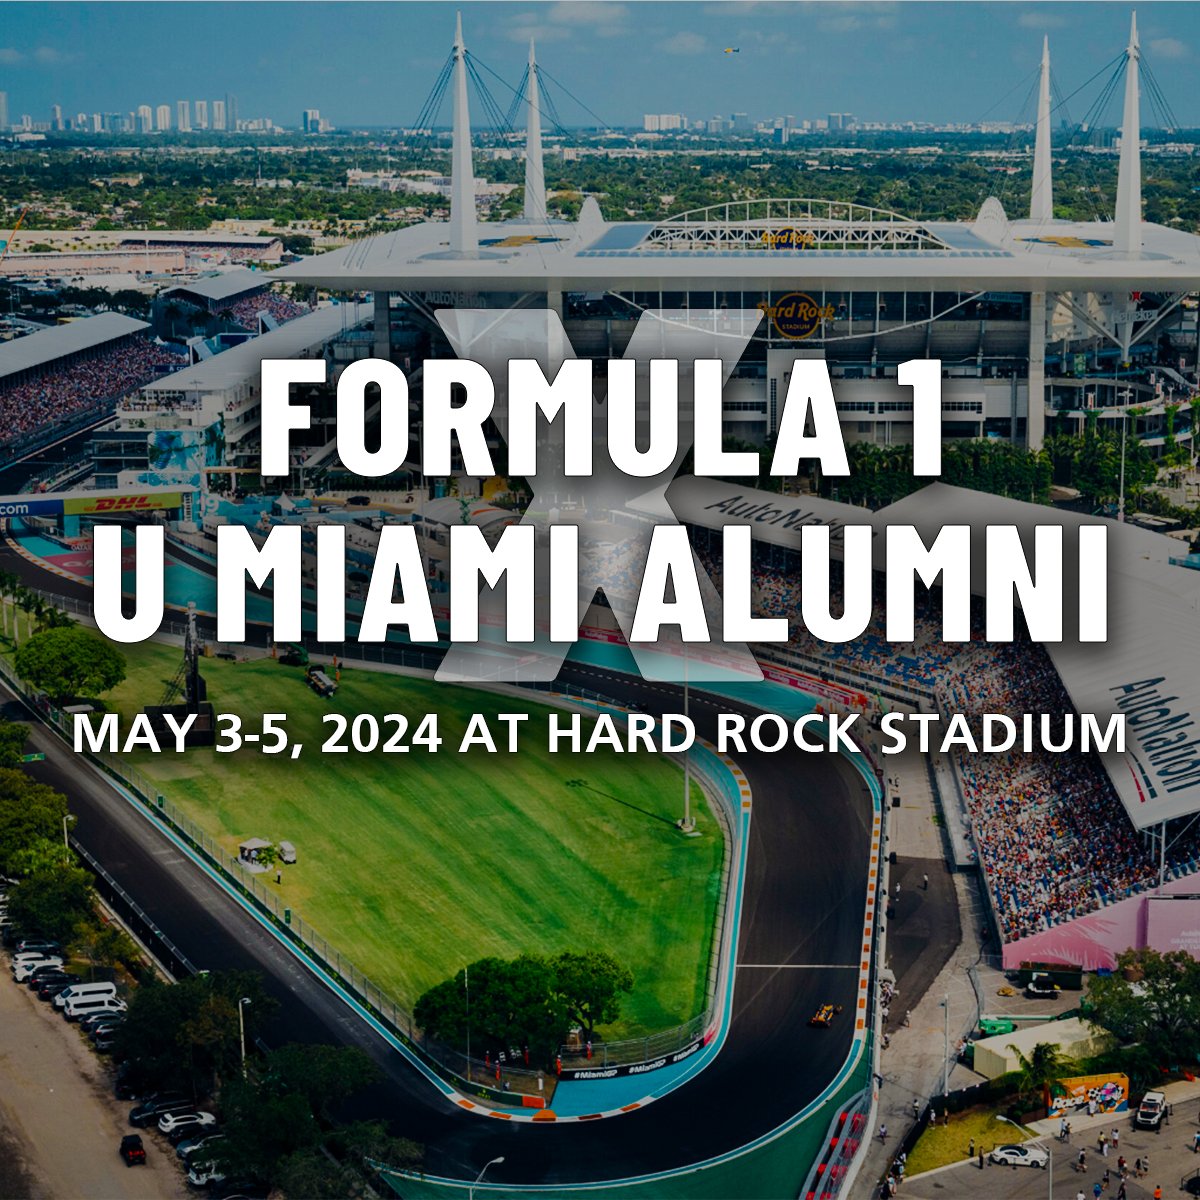 ’Canes, Let’s race! 🏎️ @F1 is back in Miami! Get close to the action and give back to students at the same time. Score a 3-Day General Admission Campus Pass for just $400. 🙌 More info at bit.ly/3Q99kS3